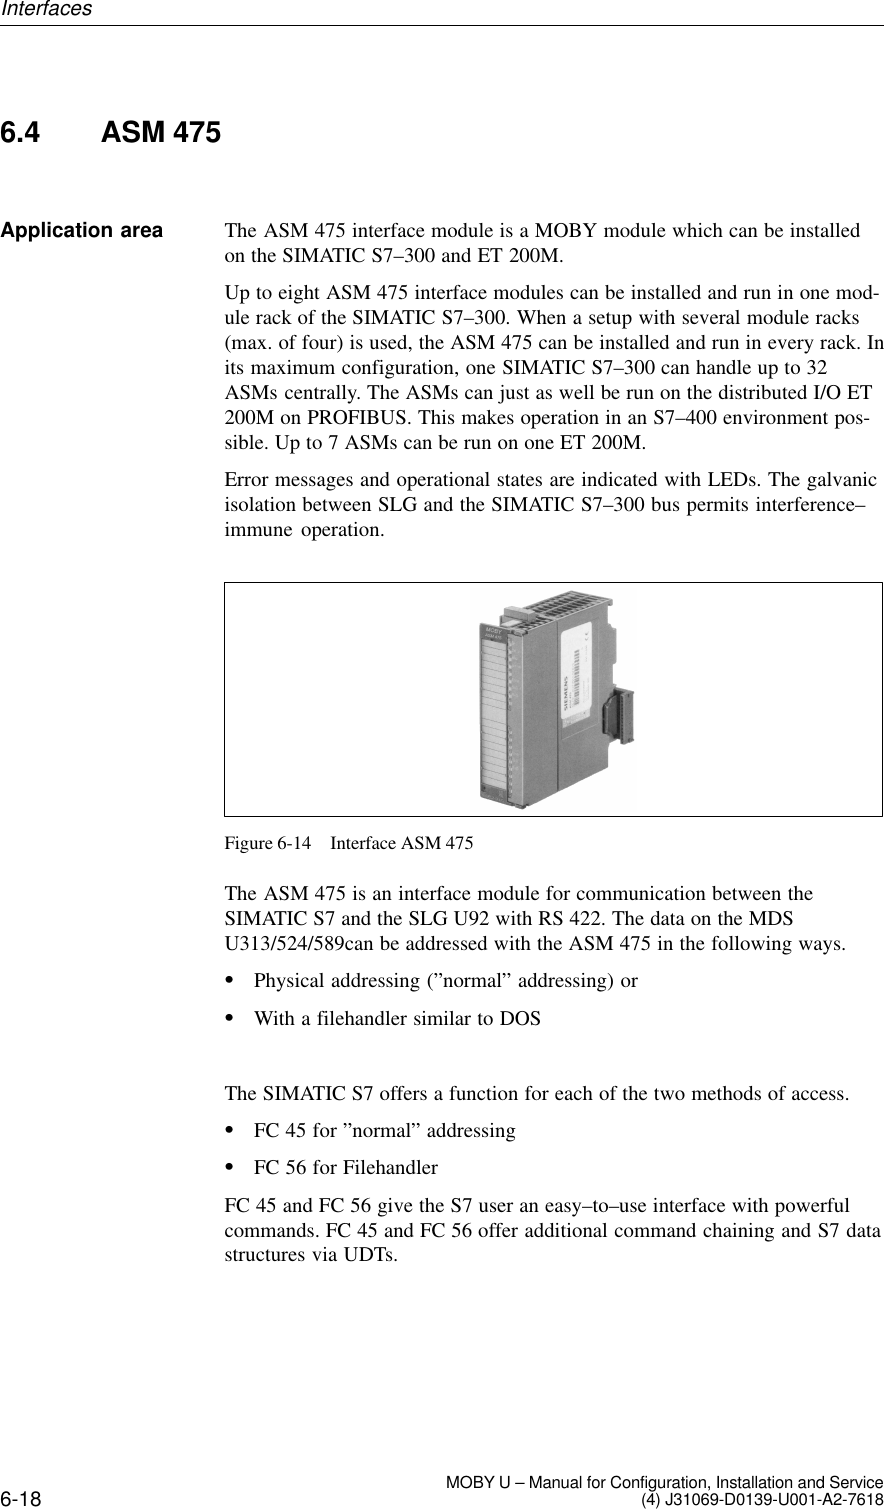 6-18 MOBY U – Manual for Configuration, Installation and Service(4) J31069-D0139-U001-A2-76186.4 ASM 475The ASM 475 interface module is a MOBY module which can be installedon the SIMATIC S7–300 and ET 200M.Up to eight ASM 475 interface modules can be installed and run in one mod-ule rack of the SIMATIC S7–300. When a setup with several module racks(max. of four) is used, the ASM 475 can be installed and run in every rack. Inits maximum configuration, one SIMATIC S7–300 can handle up to 32ASMs centrally. The ASMs can just as well be run on the distributed I/O ET200M on PROFIBUS. This makes operation in an S7–400 environment pos-sible. Up to 7 ASMs can be run on one ET 200M.Error messages and operational states are indicated with LEDs. The galvanicisolation between SLG and the SIMATIC S7–300 bus permits interference–immune operation.Figure 6-14 Interface ASM 475The ASM 475 is an interface module for communication between the SIMATIC S7 and the SLG U92 with RS 422. The data on the MDSU313/524/589can be addressed with the ASM 475 in the following ways.SPhysical addressing (”normal” addressing) orSWith a filehandler similar to DOSThe SIMATIC S7 offers a function for each of the two methods of access.SFC 45 for ”normal” addressingSFC 56 for FilehandlerFC 45 and FC 56 give the S7 user an easy–to–use interface with powerfulcommands. FC 45 and FC 56 offer additional command chaining and S7 datastructures via UDTs.Application areaInterfaces